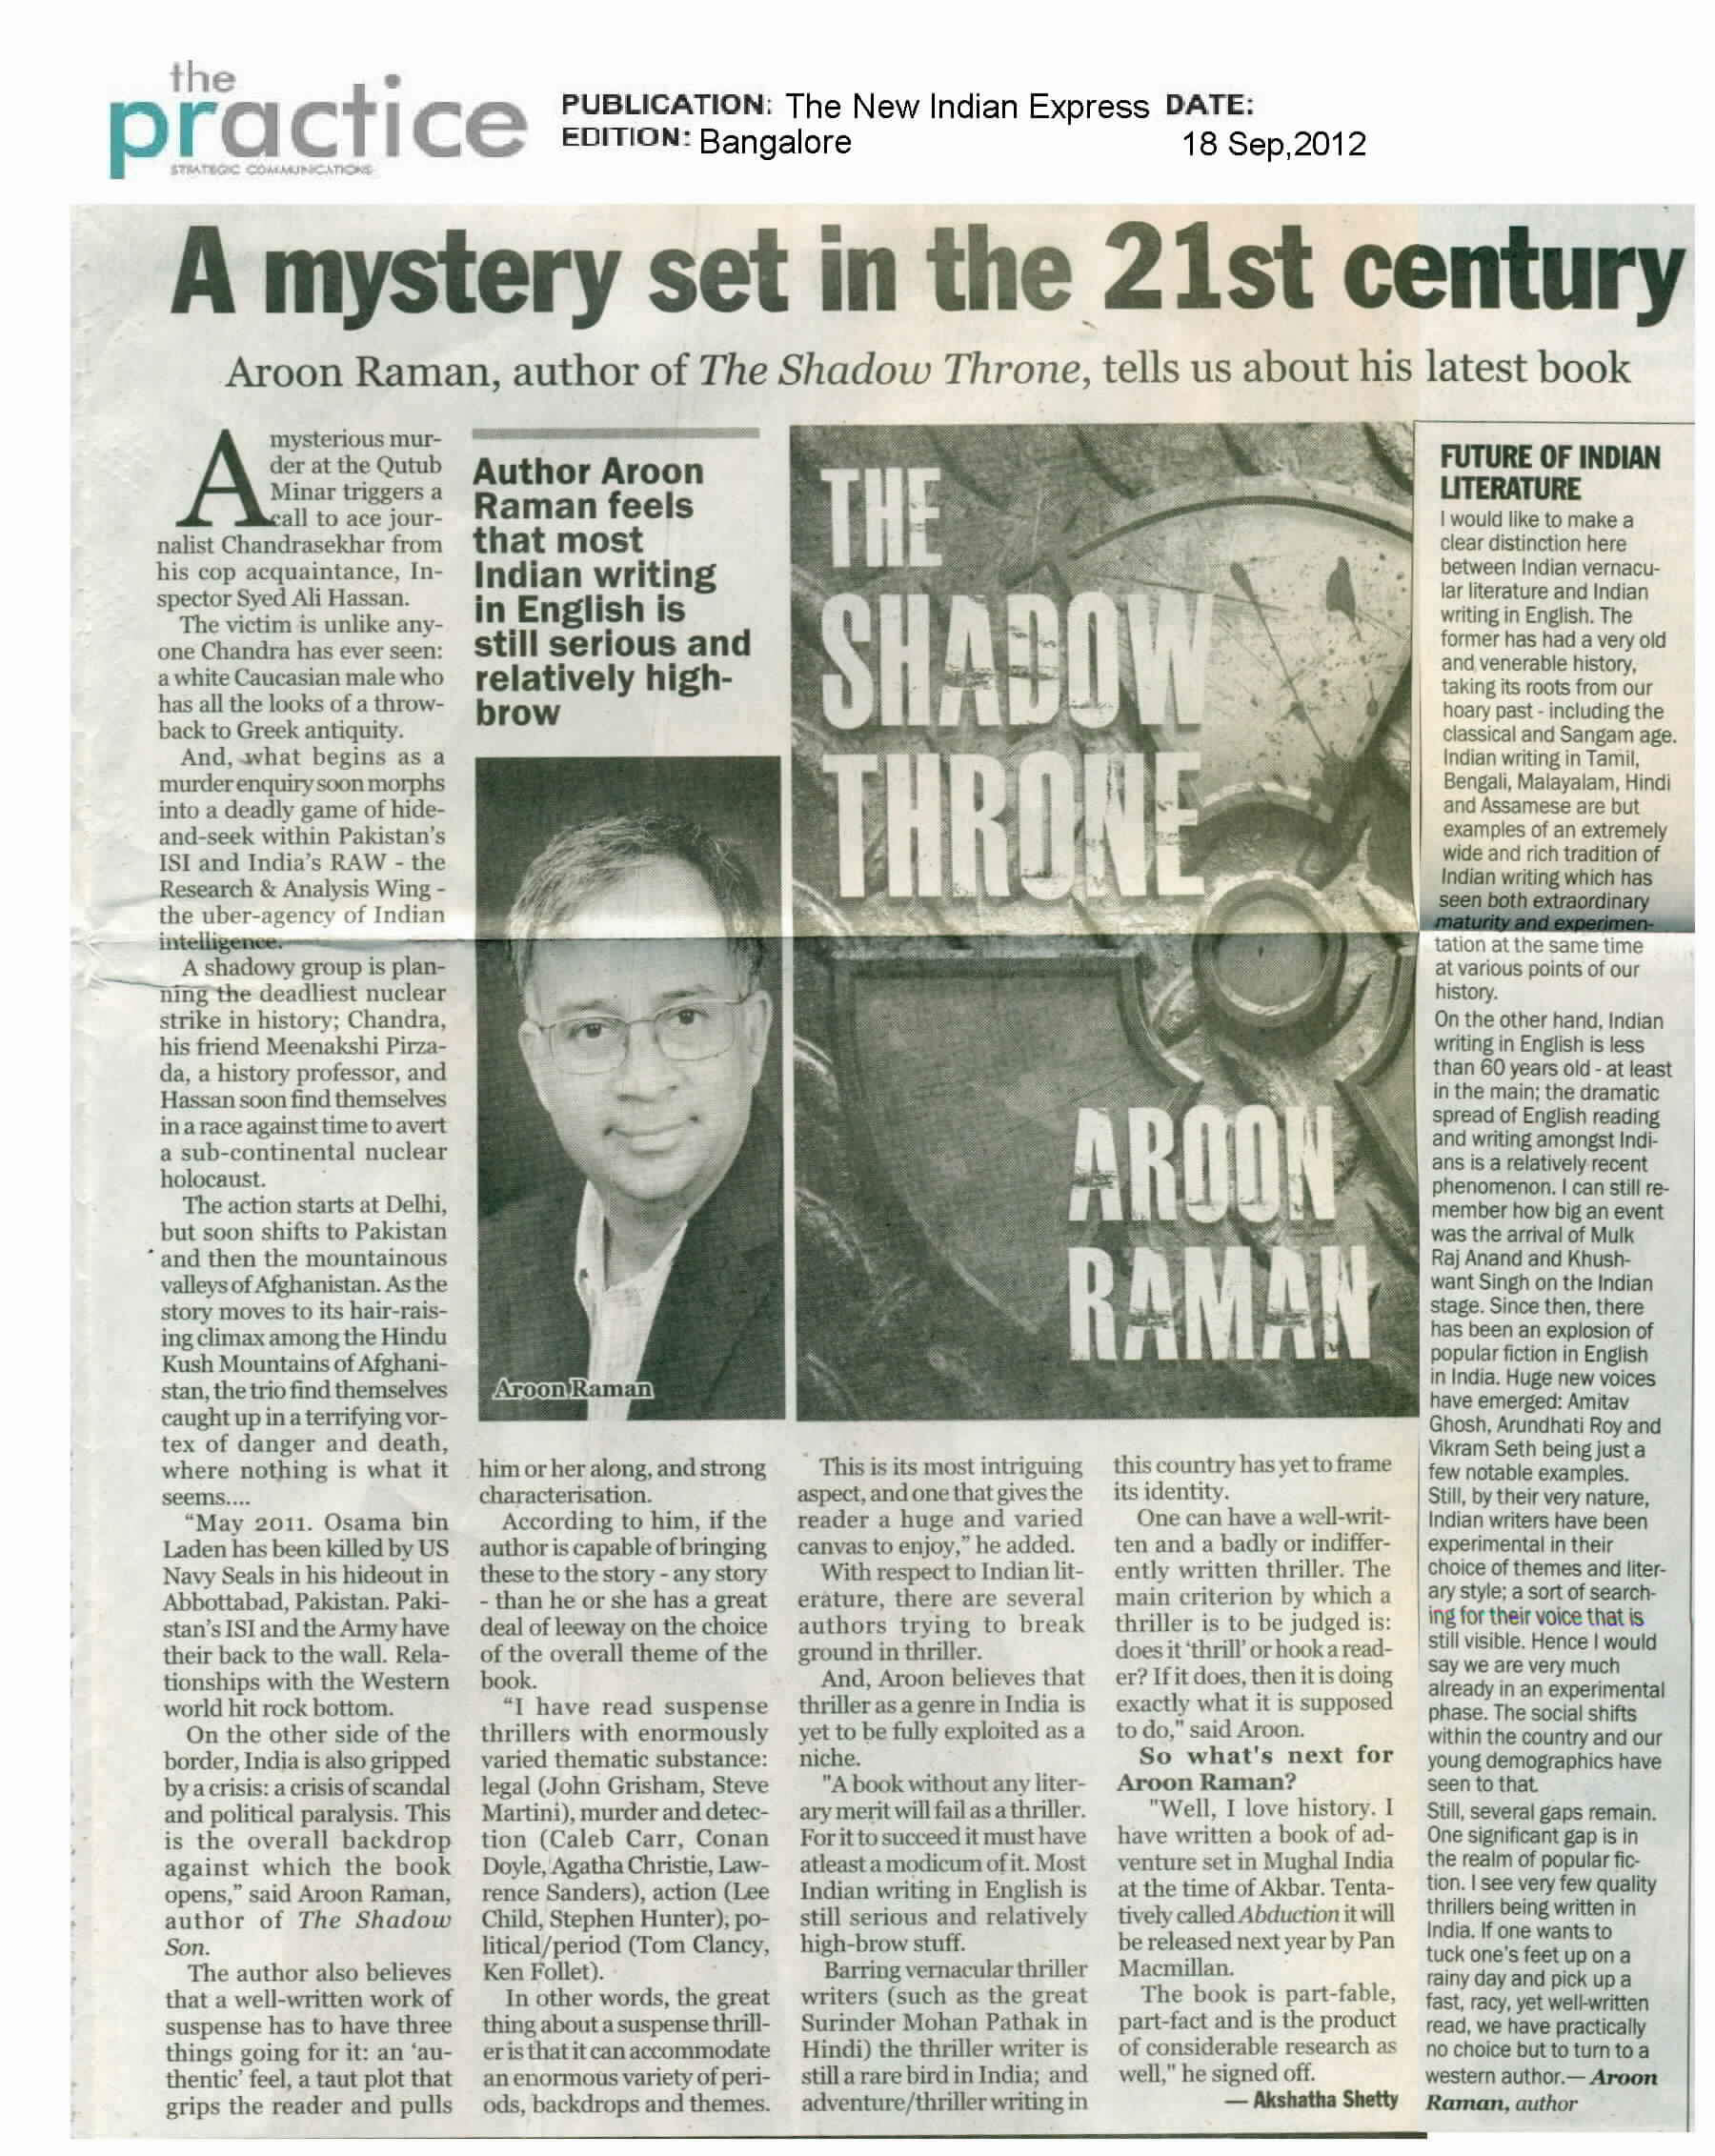 TST_A Mystery set in 21st century, The New Indian Express, 18 September, 2012